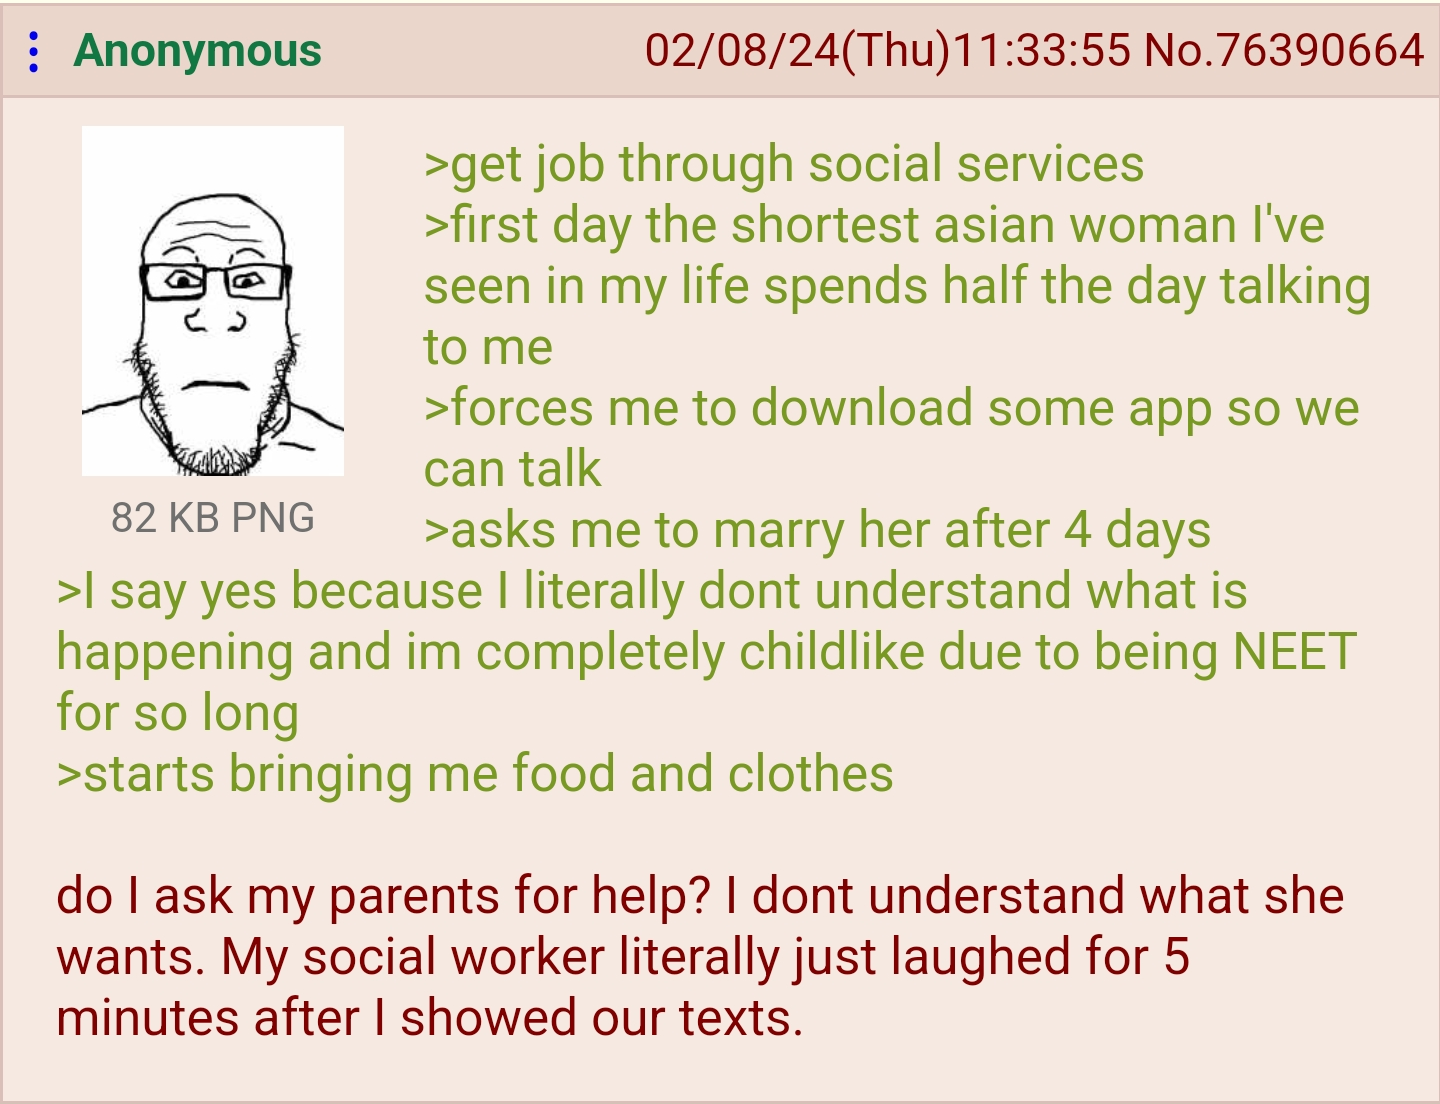 anon finds love